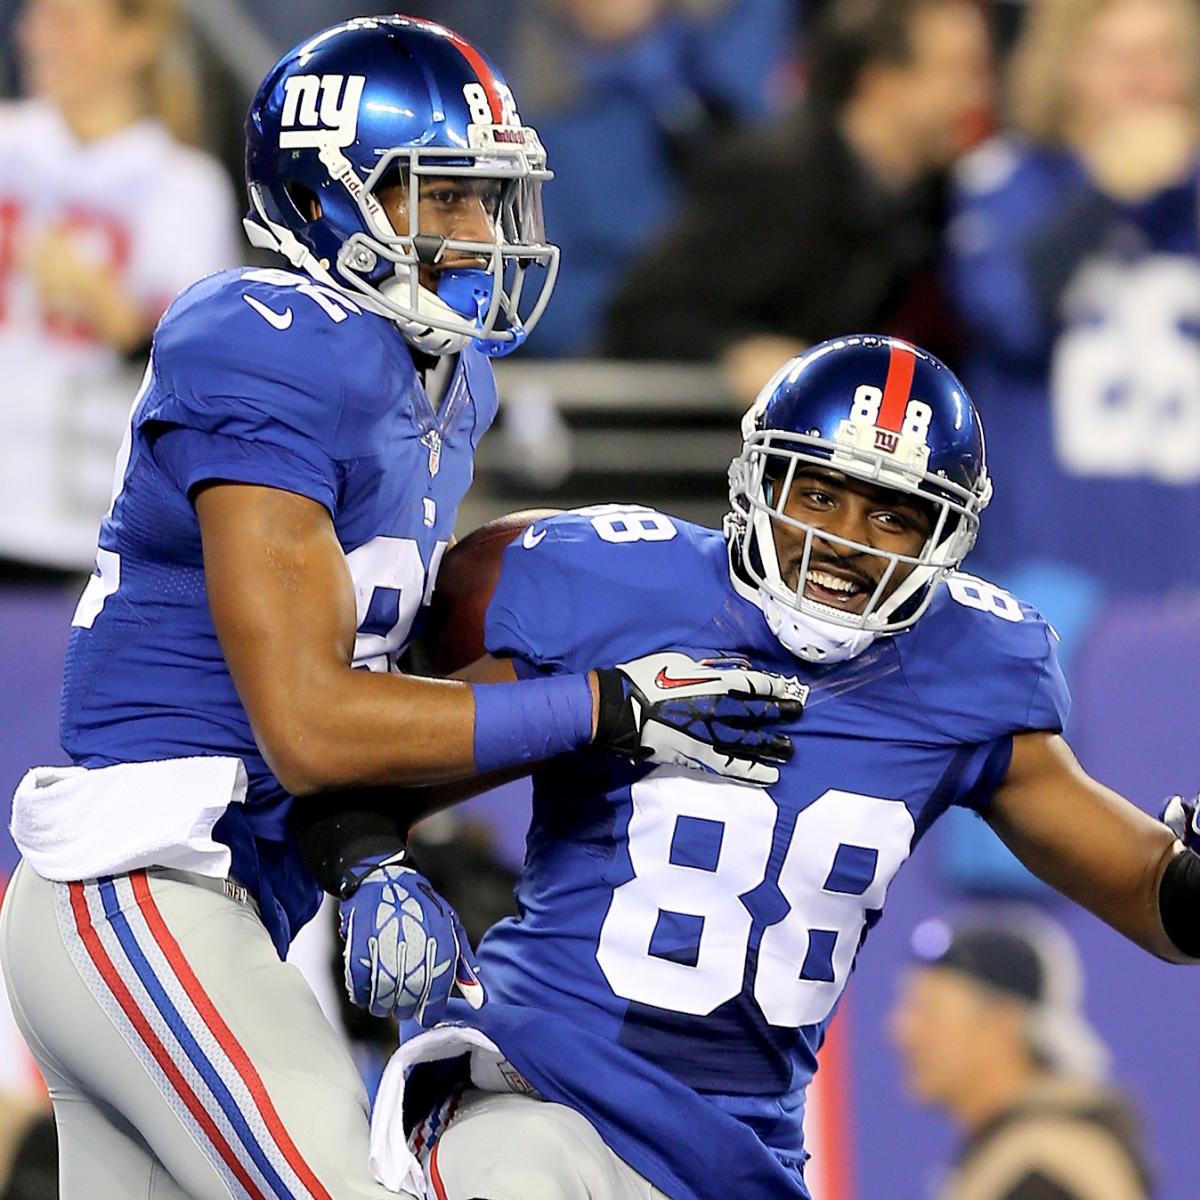 Fantasy Football Tuesday: Giants rookie WR Hakeem Nicks continues to score  – New York Daily News